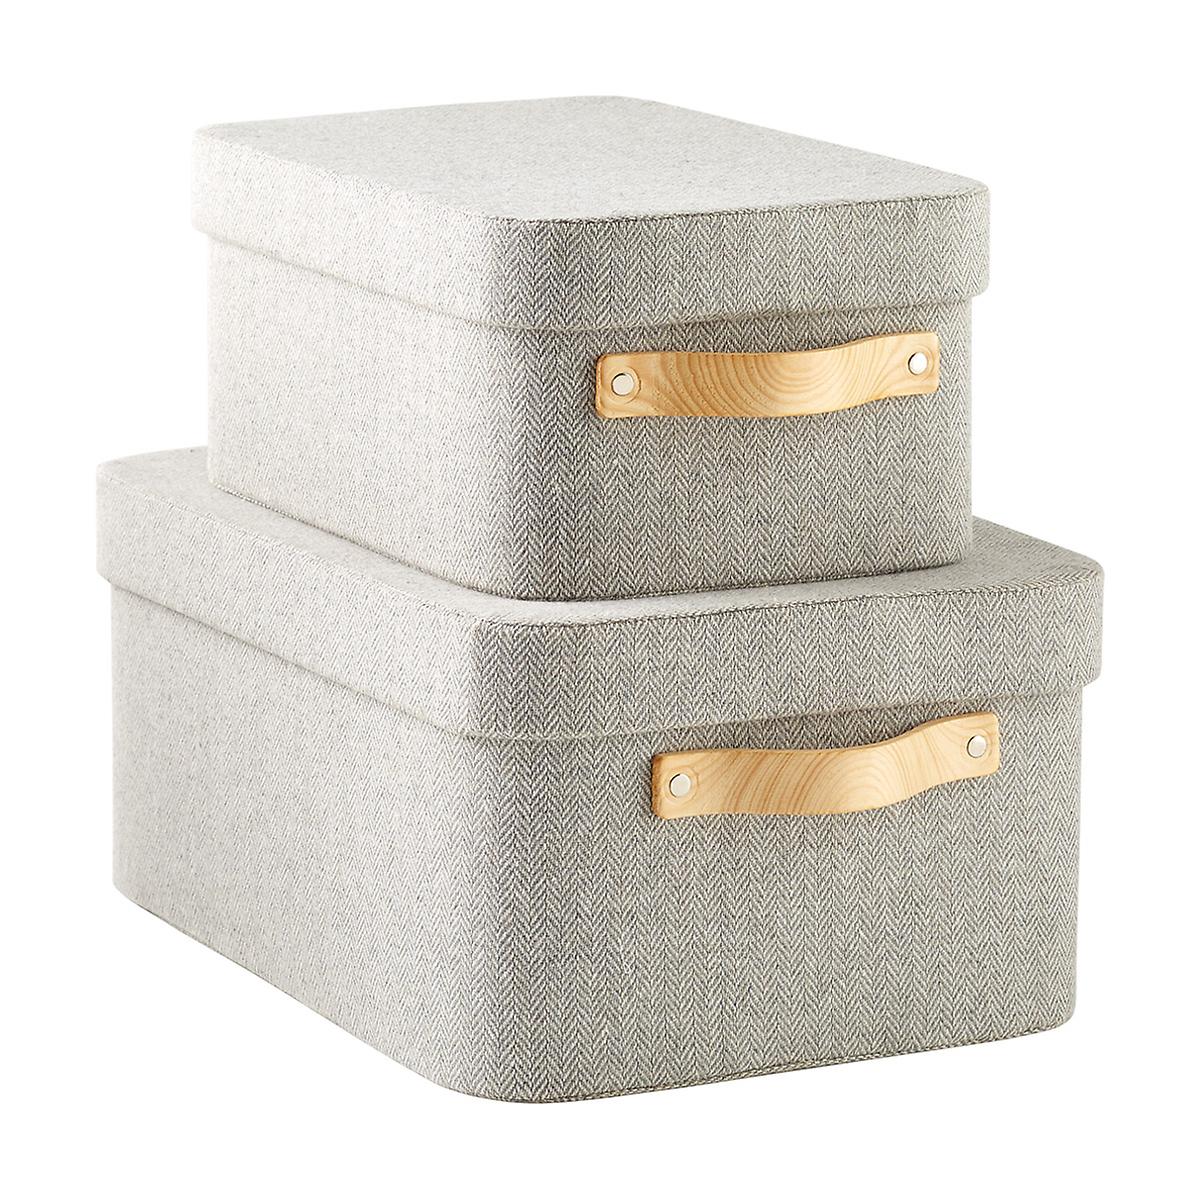 Large 3-Pack Rectangle Storage Box by  Storage Bins for Closet with Lids and Handles Umi Beige Fabric Storage Baskets Containers